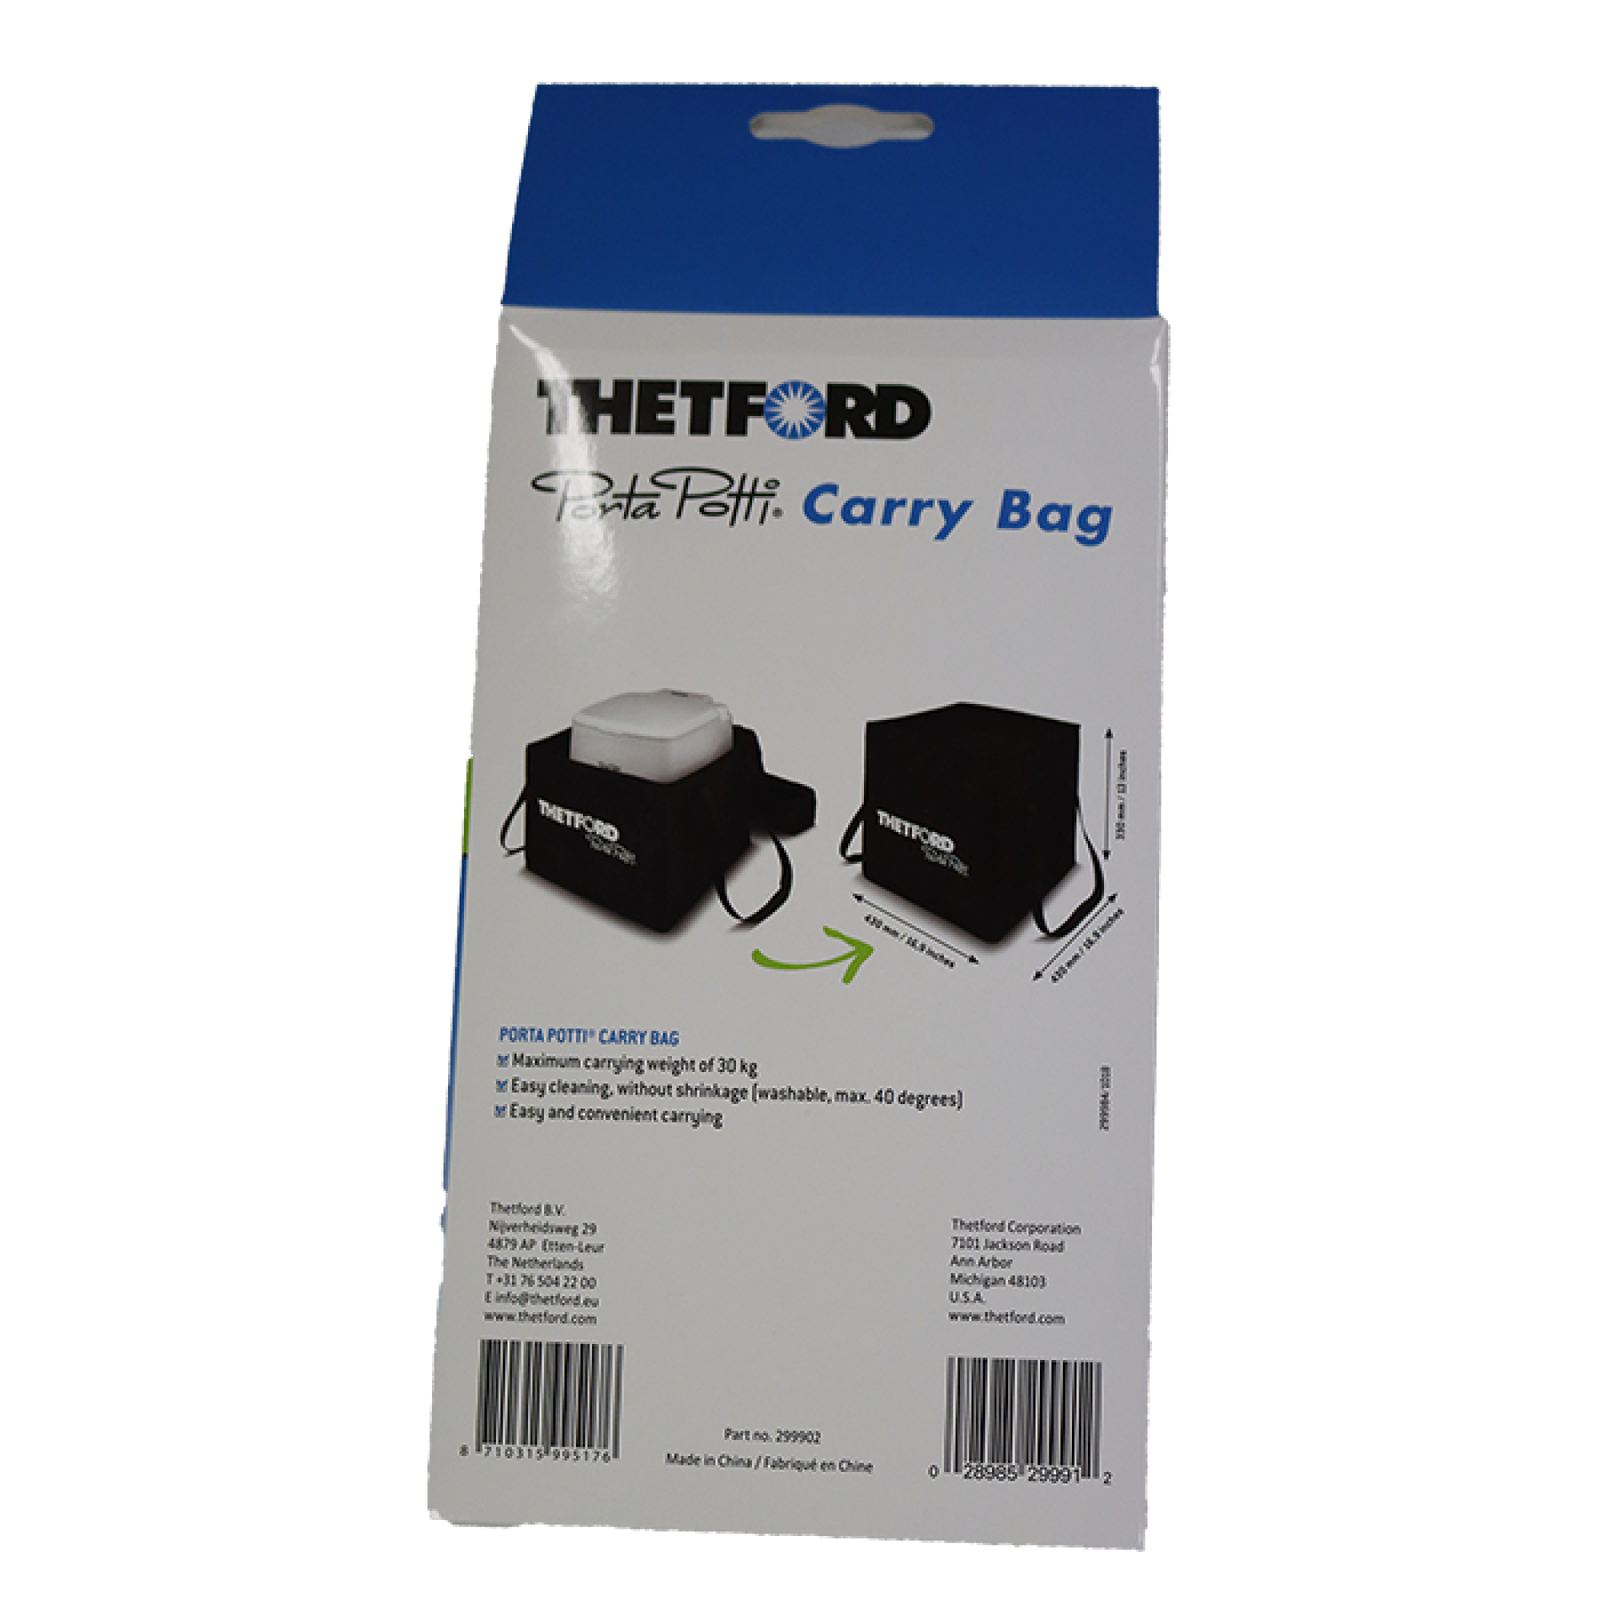 Thetford 365 Camping Toilet Carry Bag by Outcamp. Made in Australia